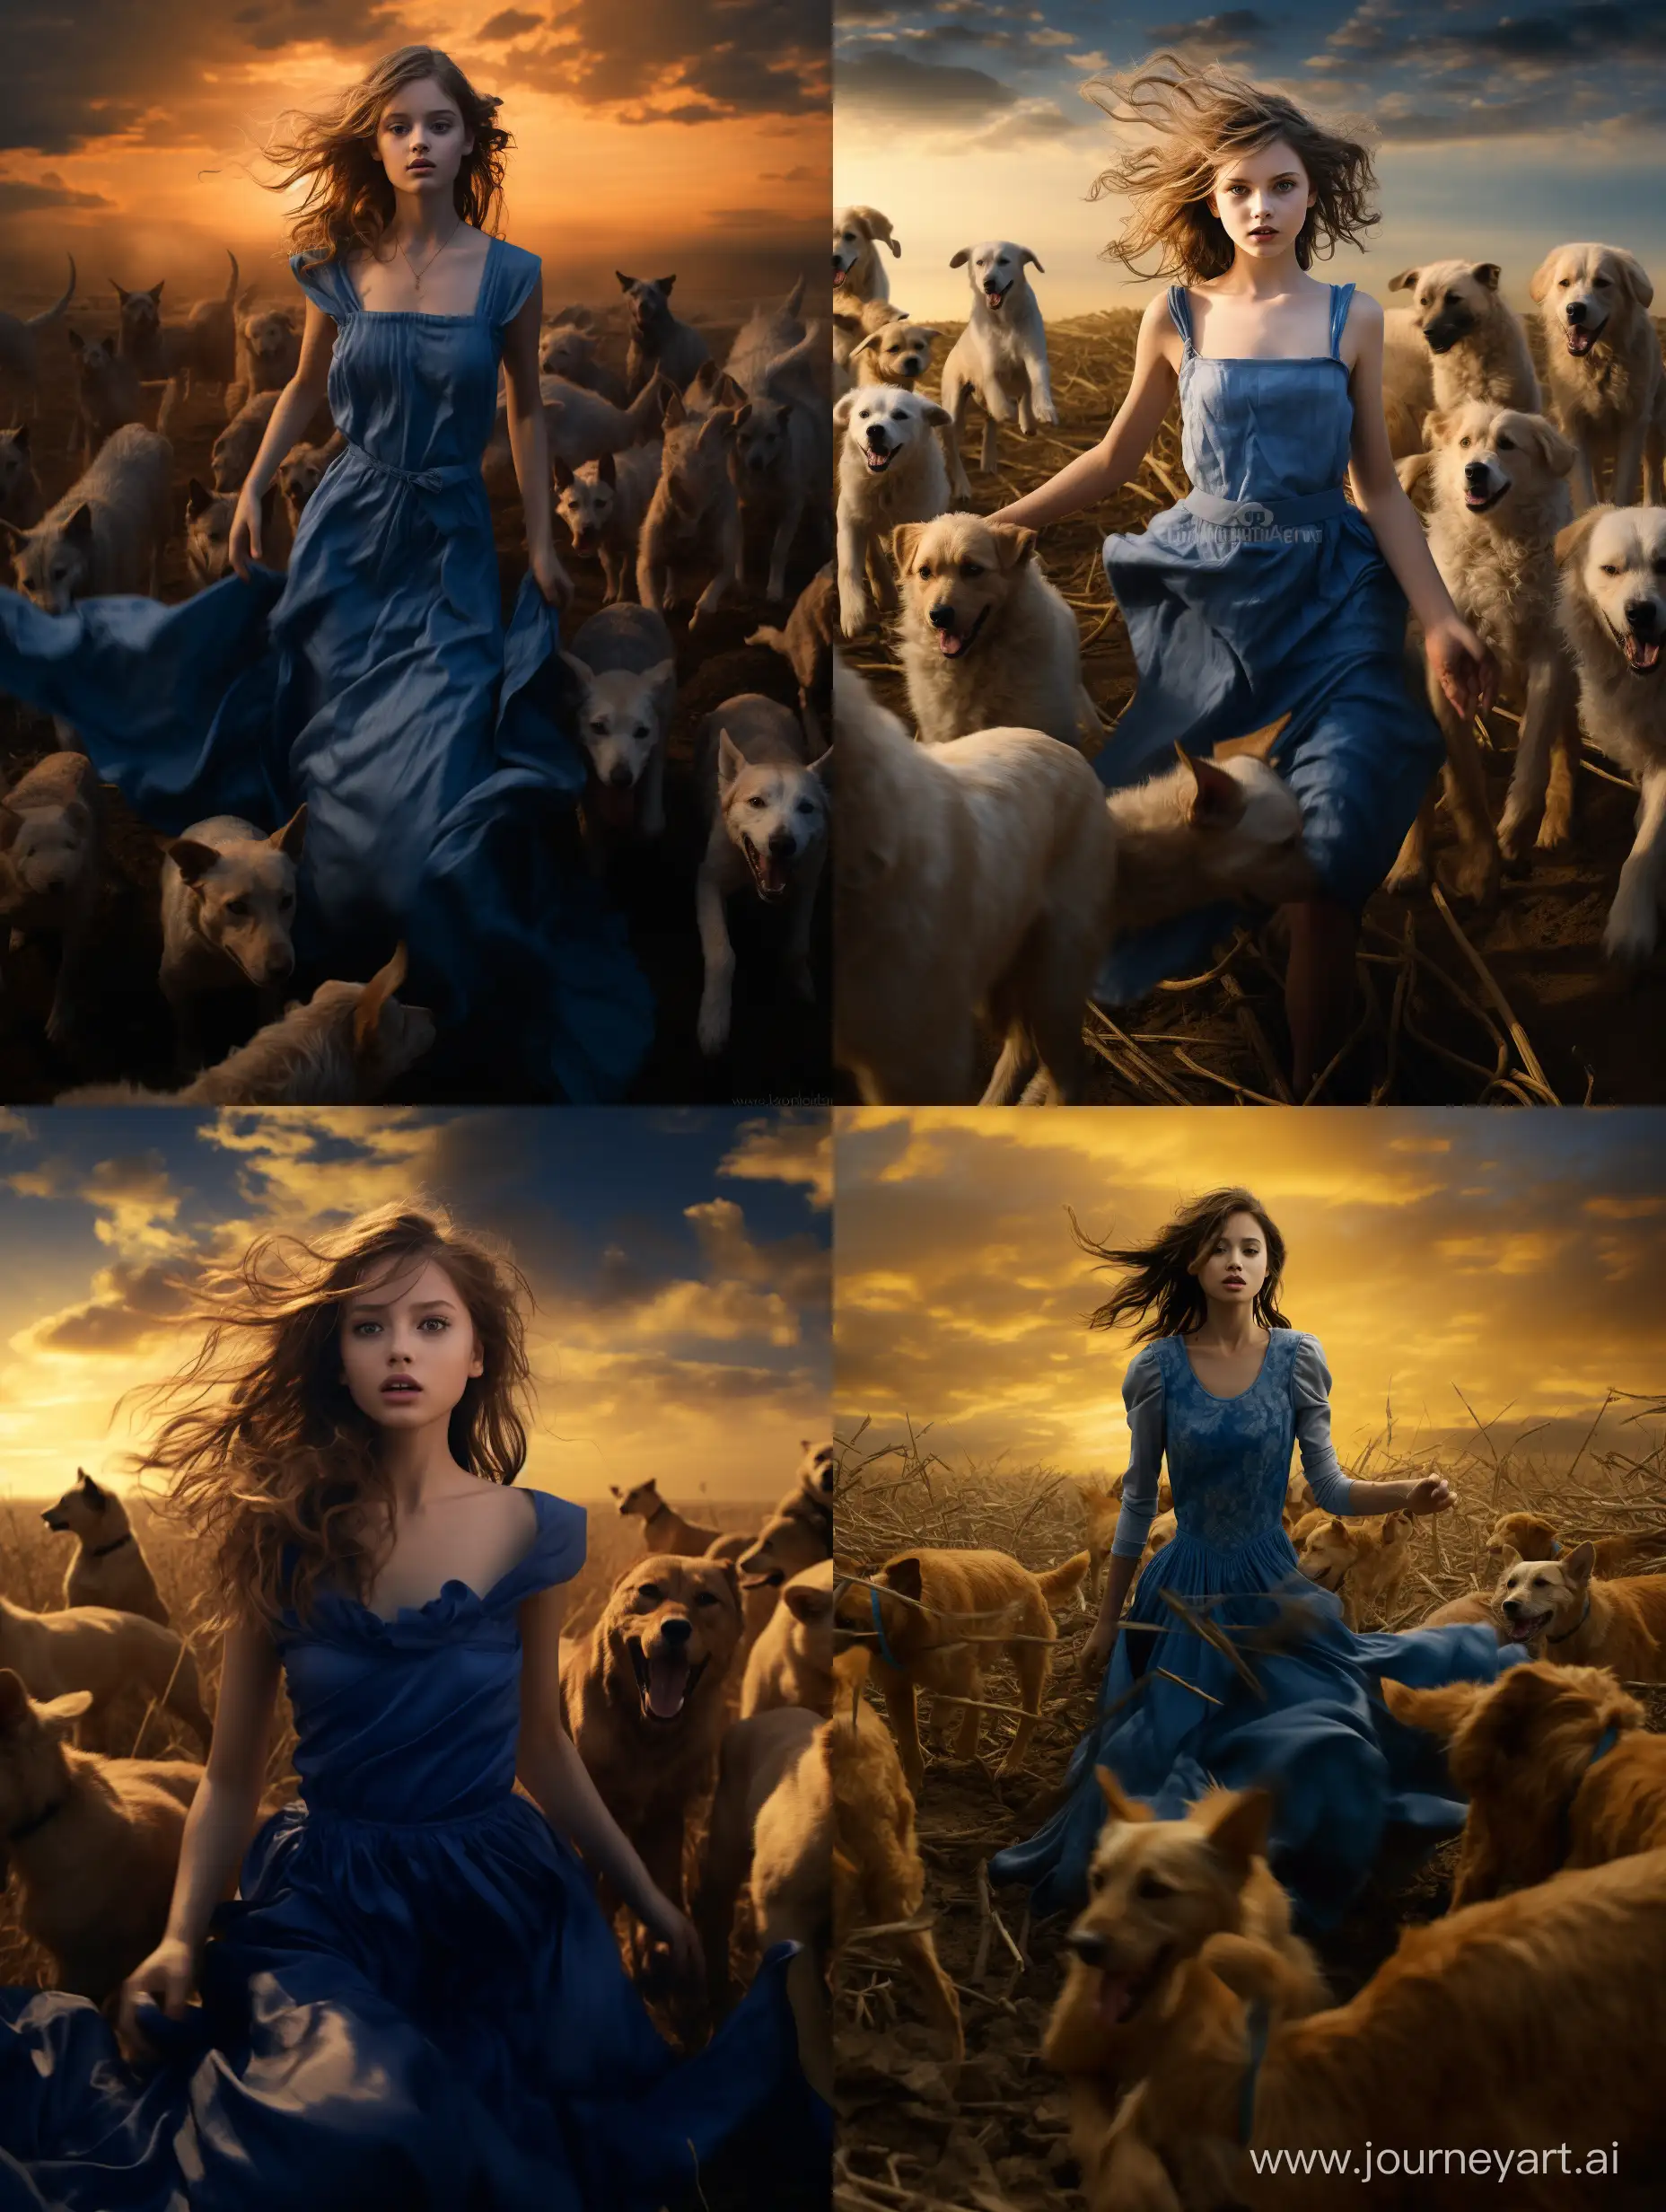 Courageous-Escape-Young-Girl-in-Blue-Dress-Evading-Pursuing-Dogs-during-Golden-Hour